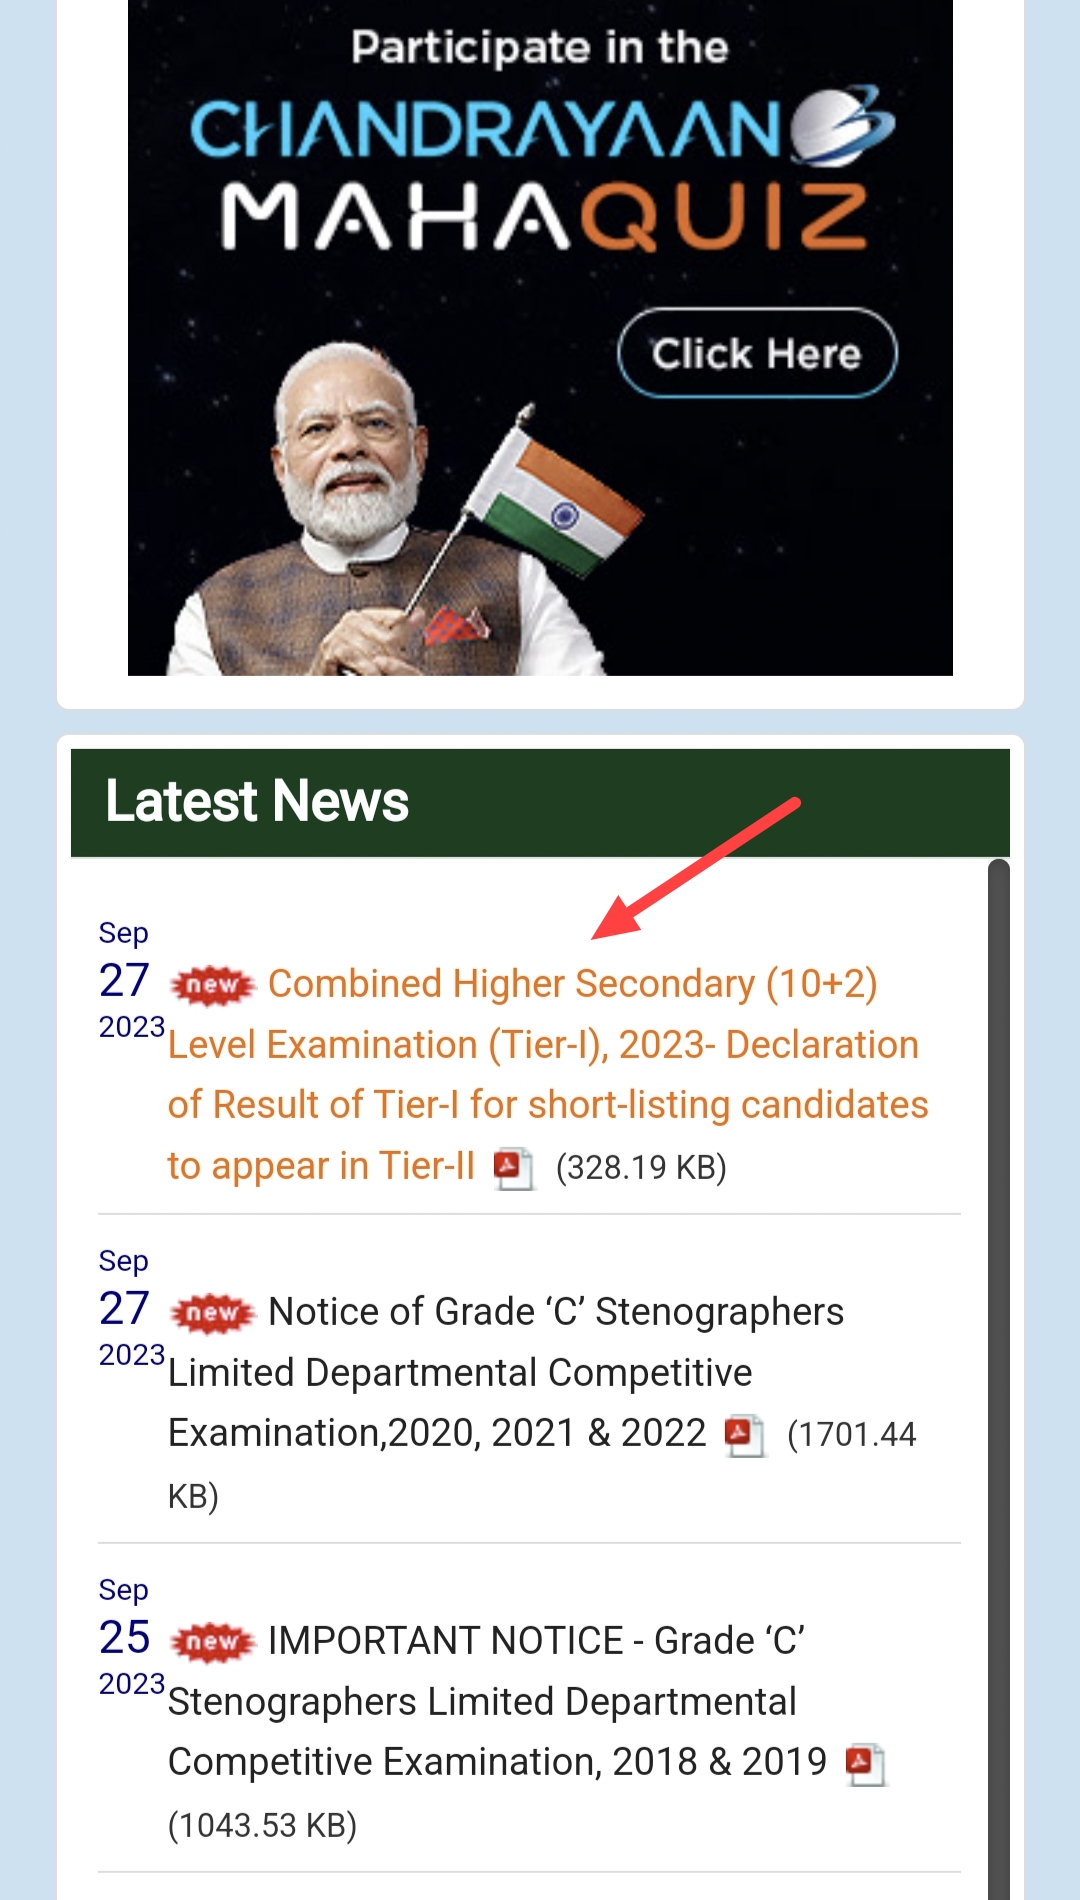 Combined Higher Secondary (10+2) Level Examination (Tier-I), 2023- Declaration of Result of Tier-I for short-listing candidates to appear in Tier-II 